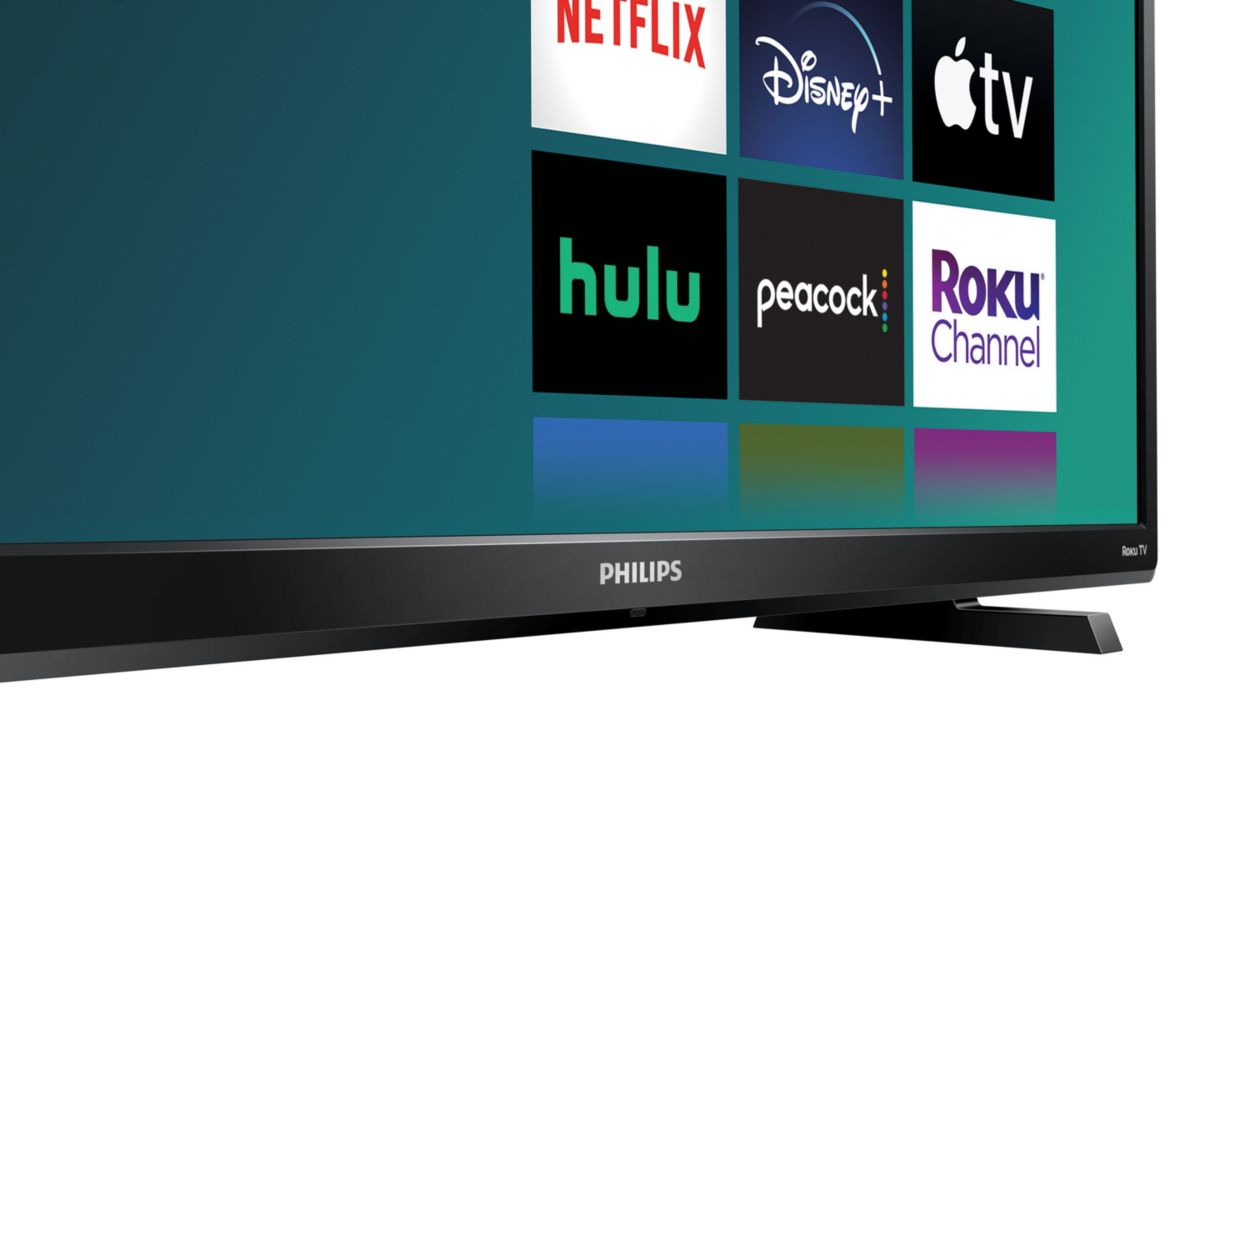 Philips 32 PFL64 HD Roku Smart TV with 2-Year Coverage